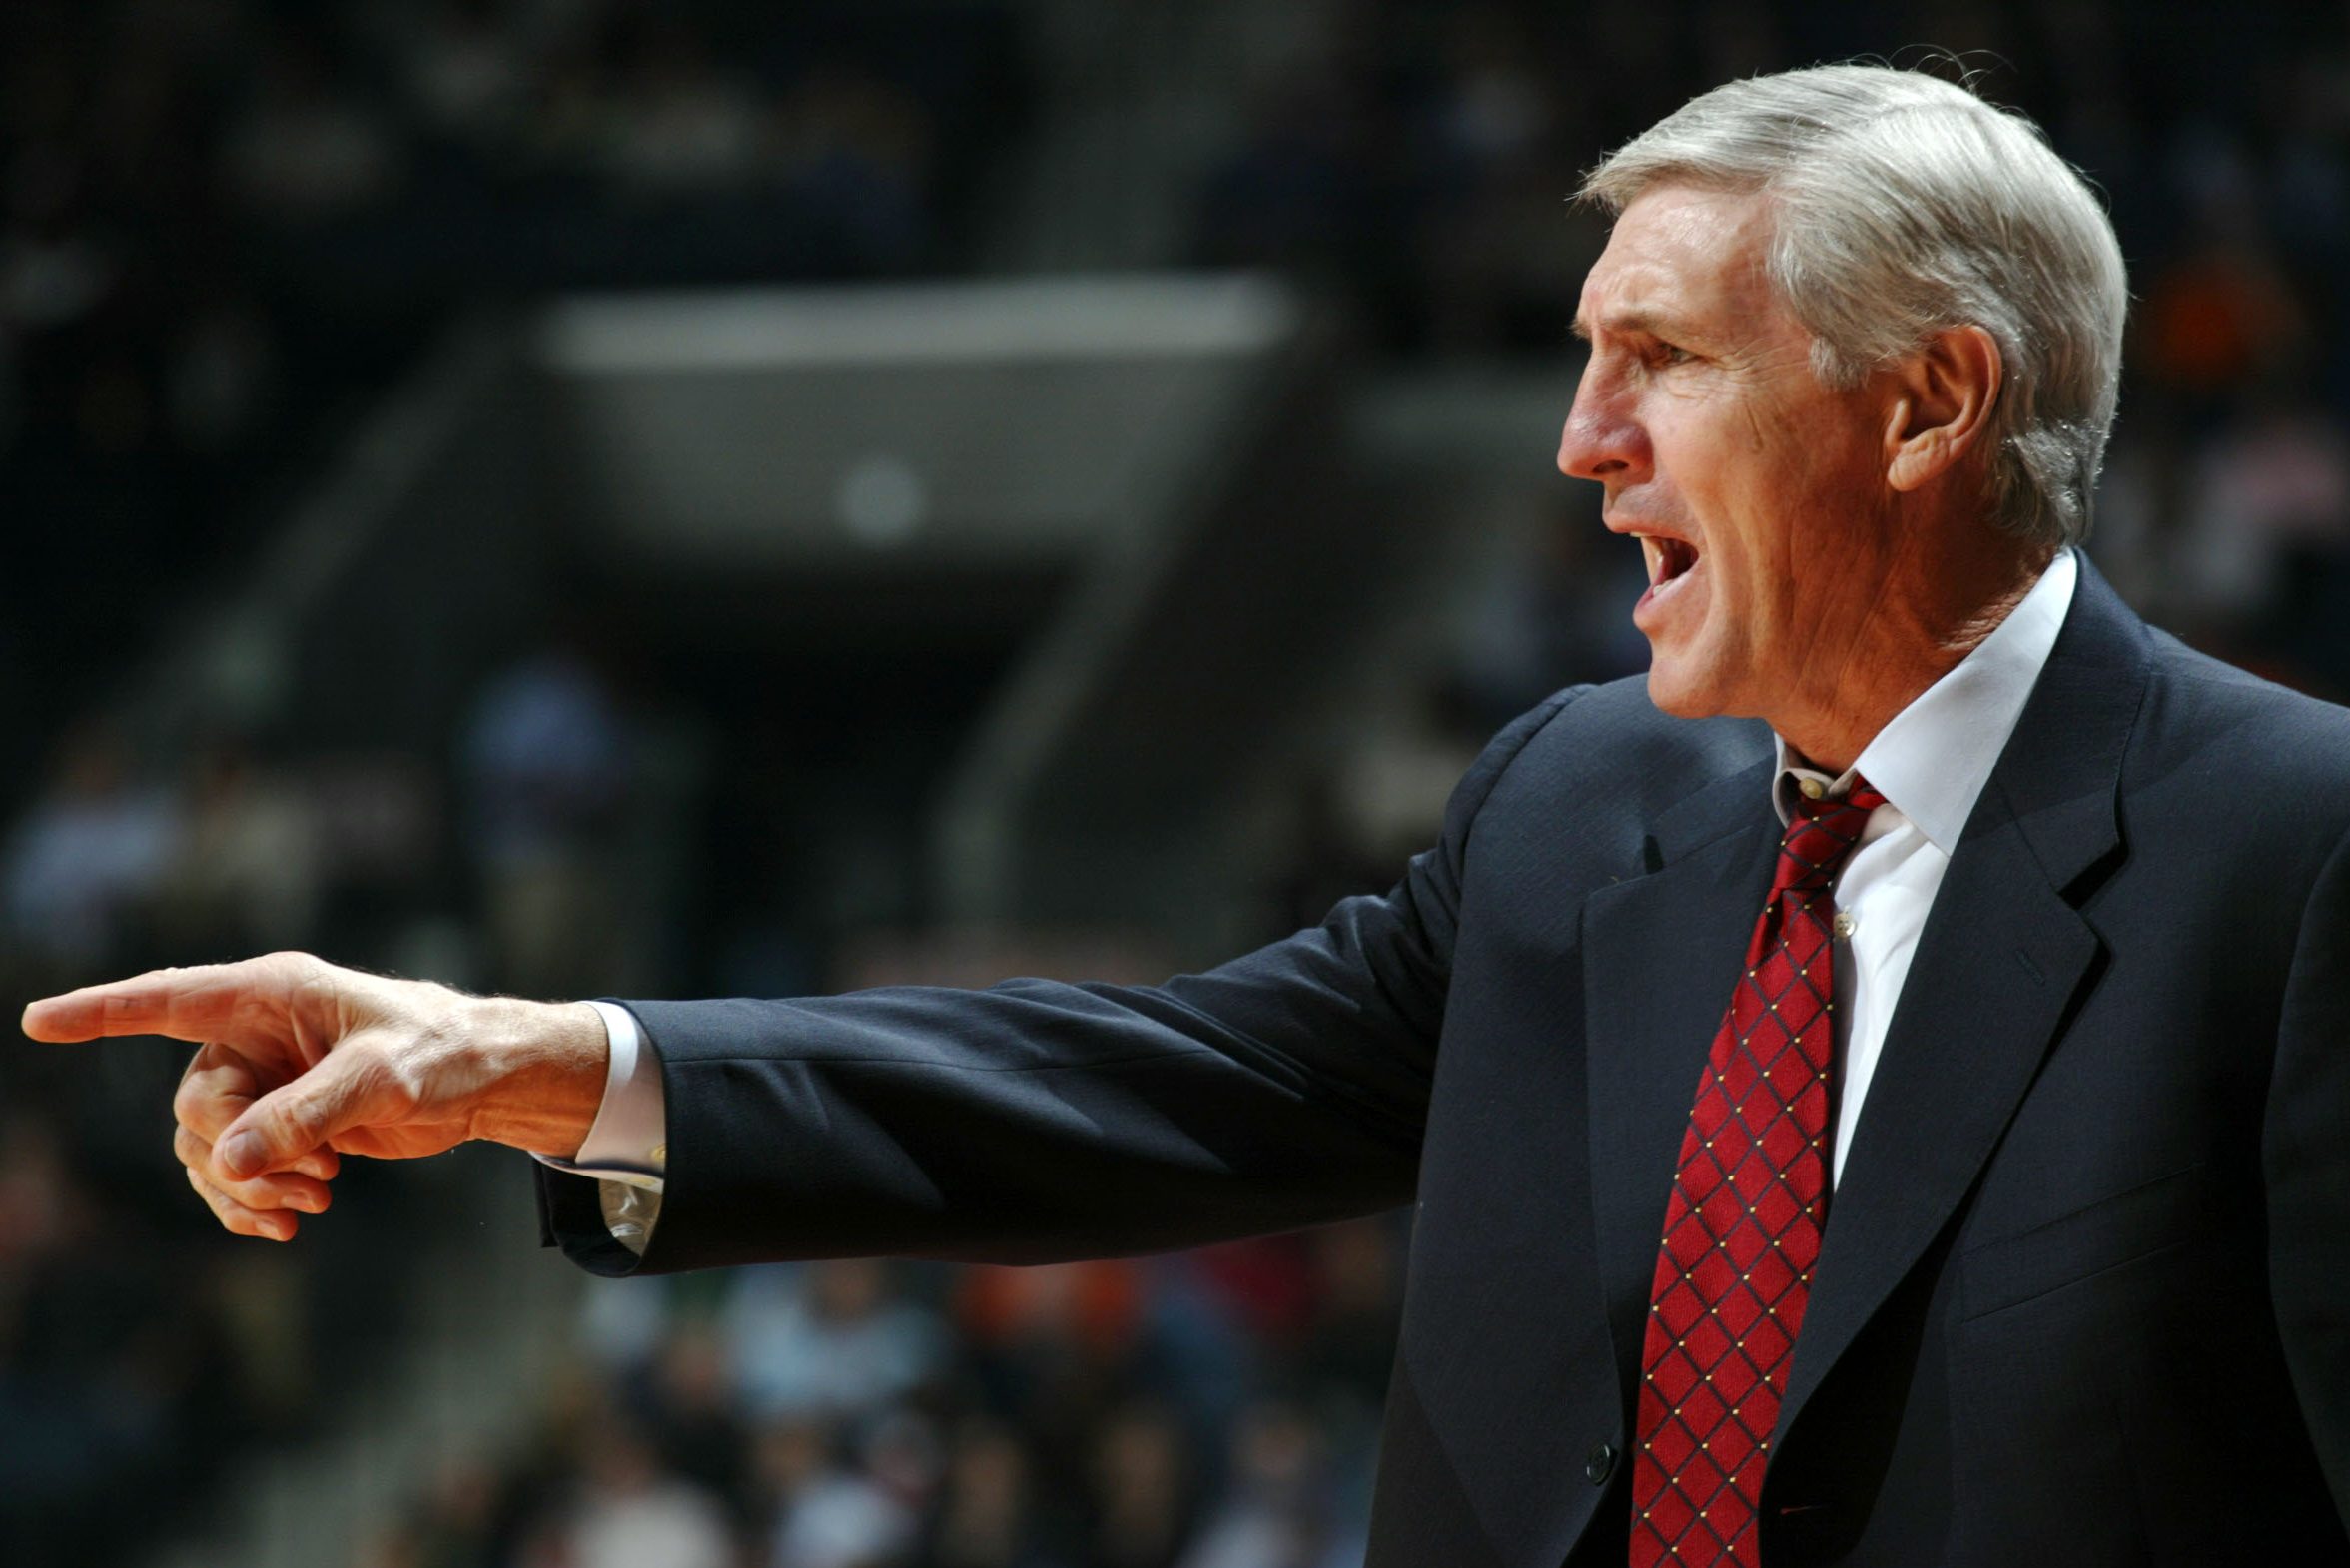 Jerry Sloan coaches during a game, before his death in 2020